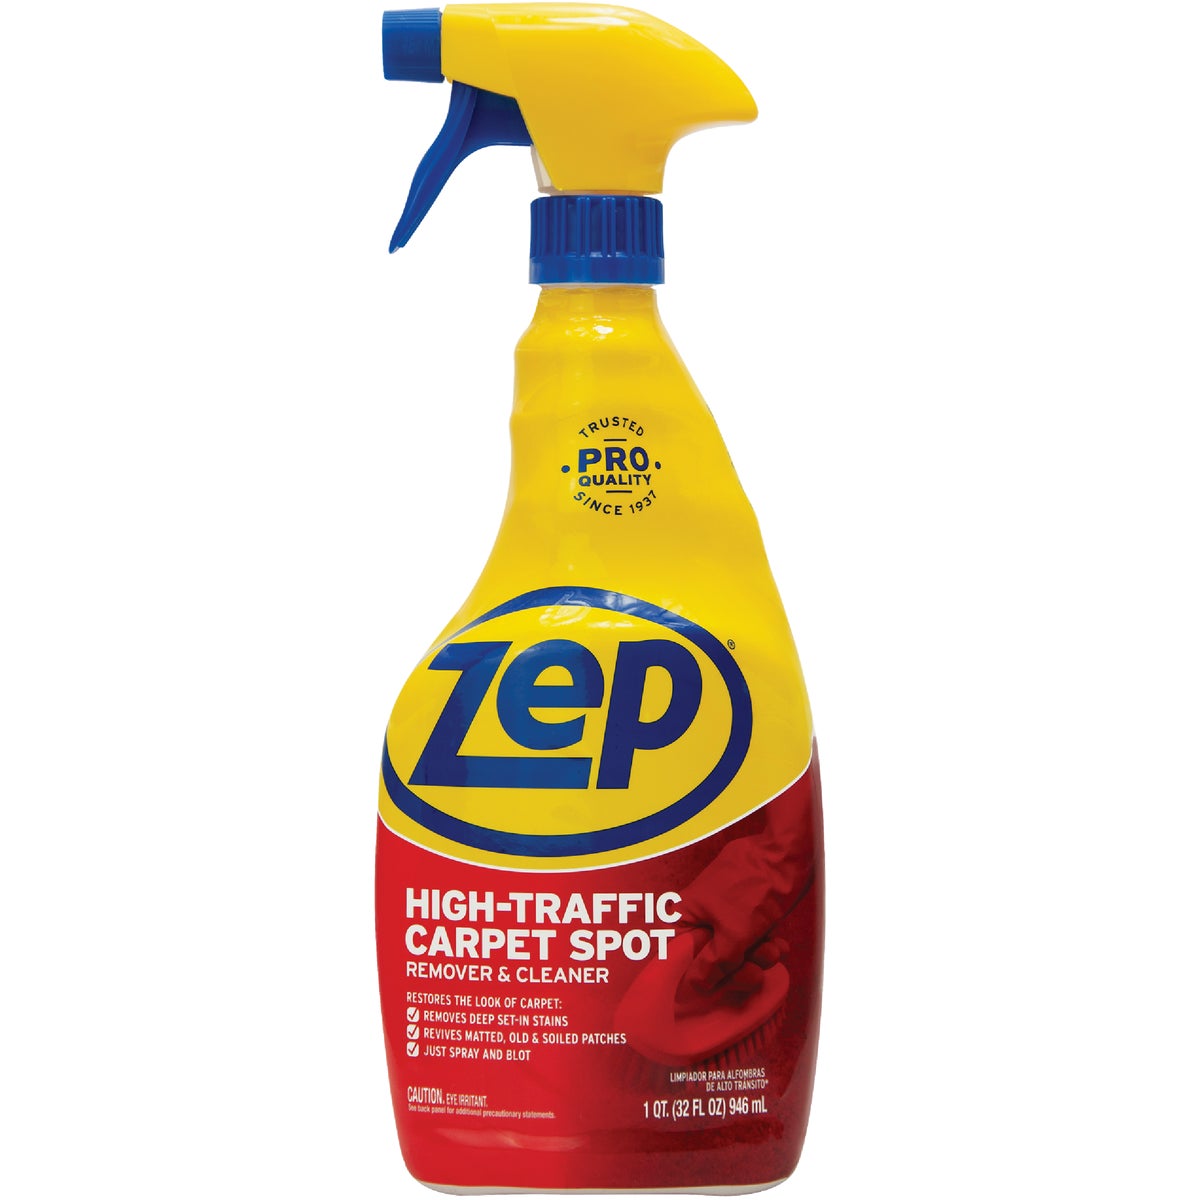 Item 618692, General use carpet cleaner and pre-spotter specially formulated to remove 